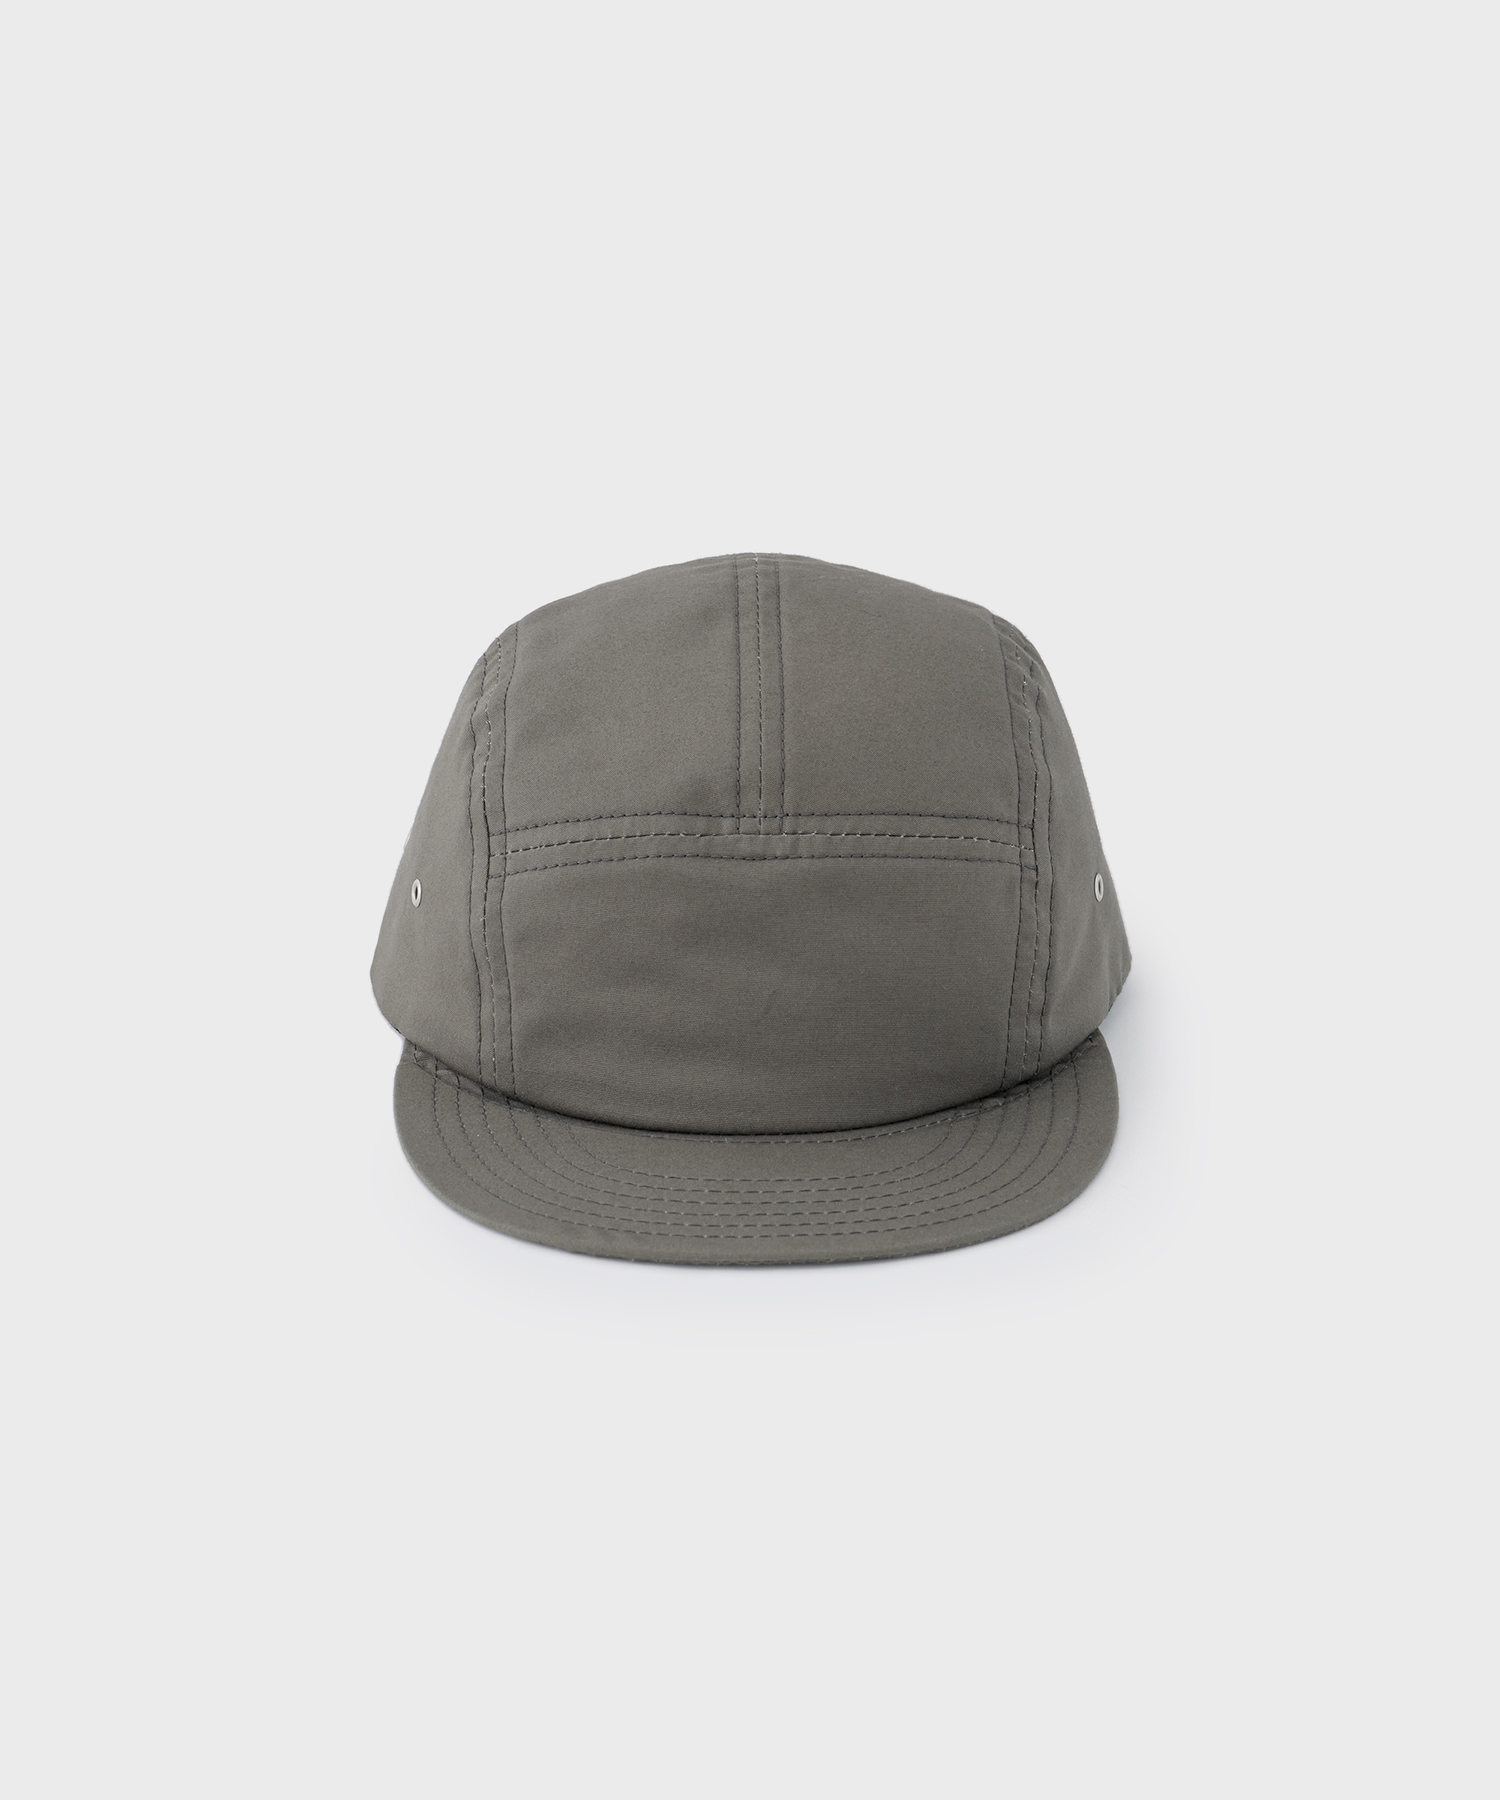 RACAL for A/O. Exclusive Flip Up Jet Ventile Cap (Charcoal)